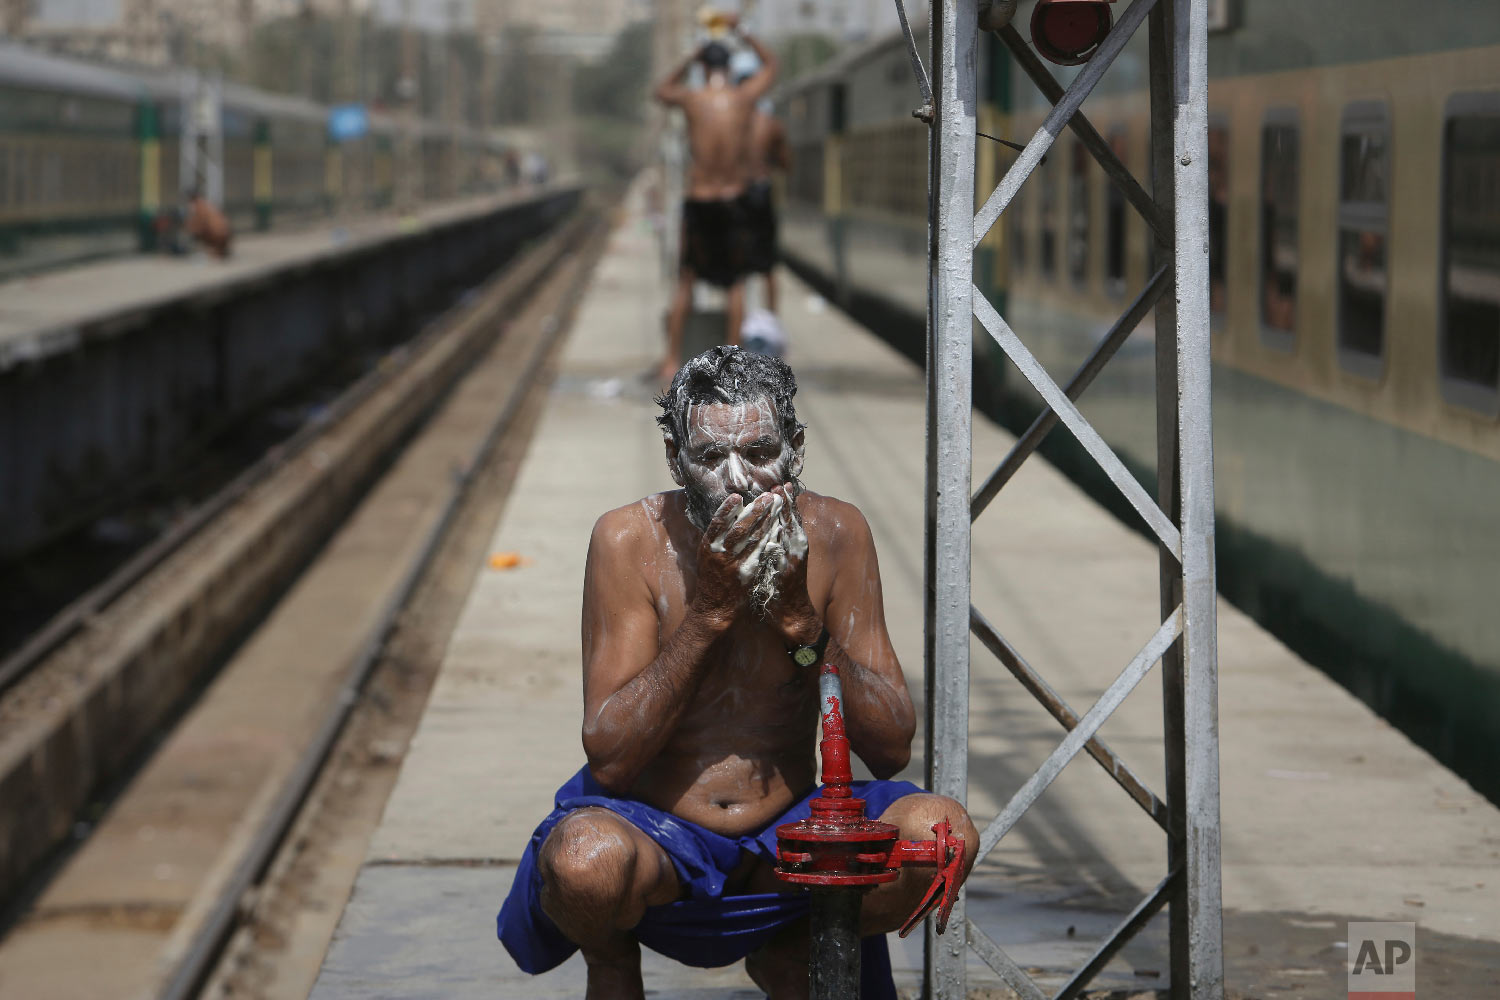  Pakistan railway employees cool themselves off during a hot afternoon in Karachi, Pakistan, Wednesday, March 28, 2018. People experience warm weather, with the temperatures reaching 39 degree Celsius (102 Fahrenheit). (AP Photo/Fareed Khan) 